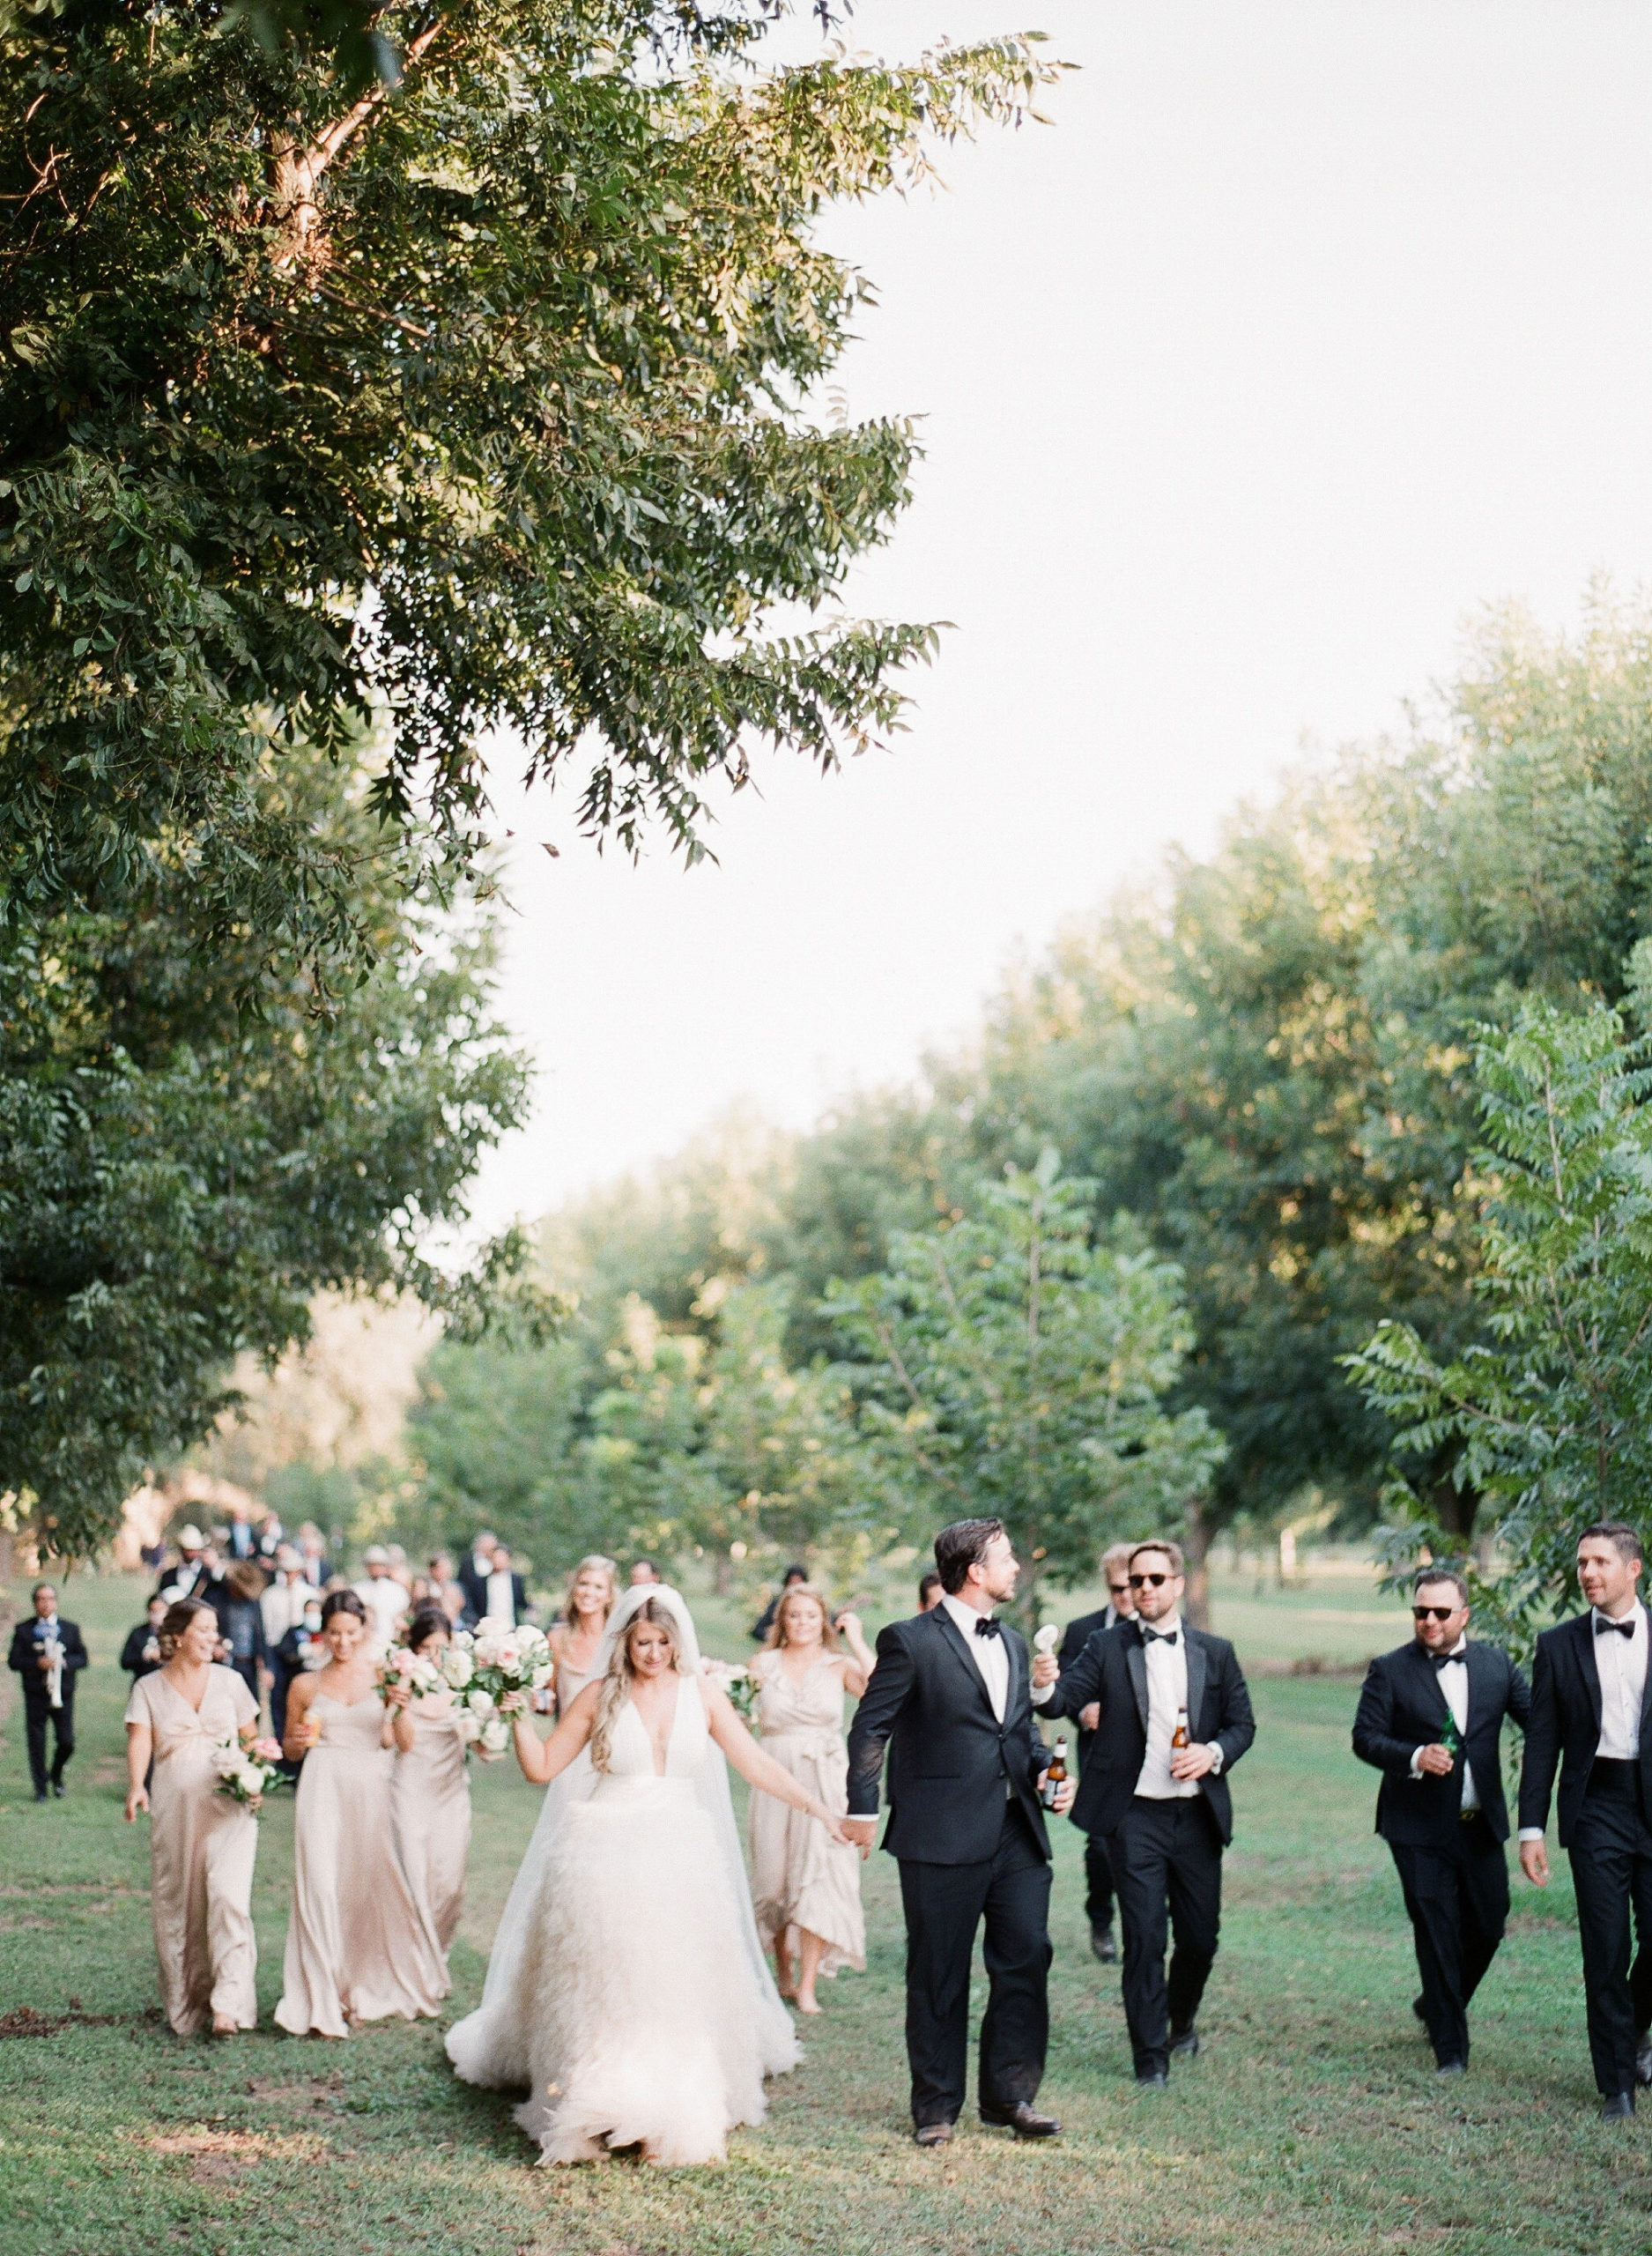 Texas Private Estate Wedding During Covid BW Theory Matthew Moore Photography 26.jpg